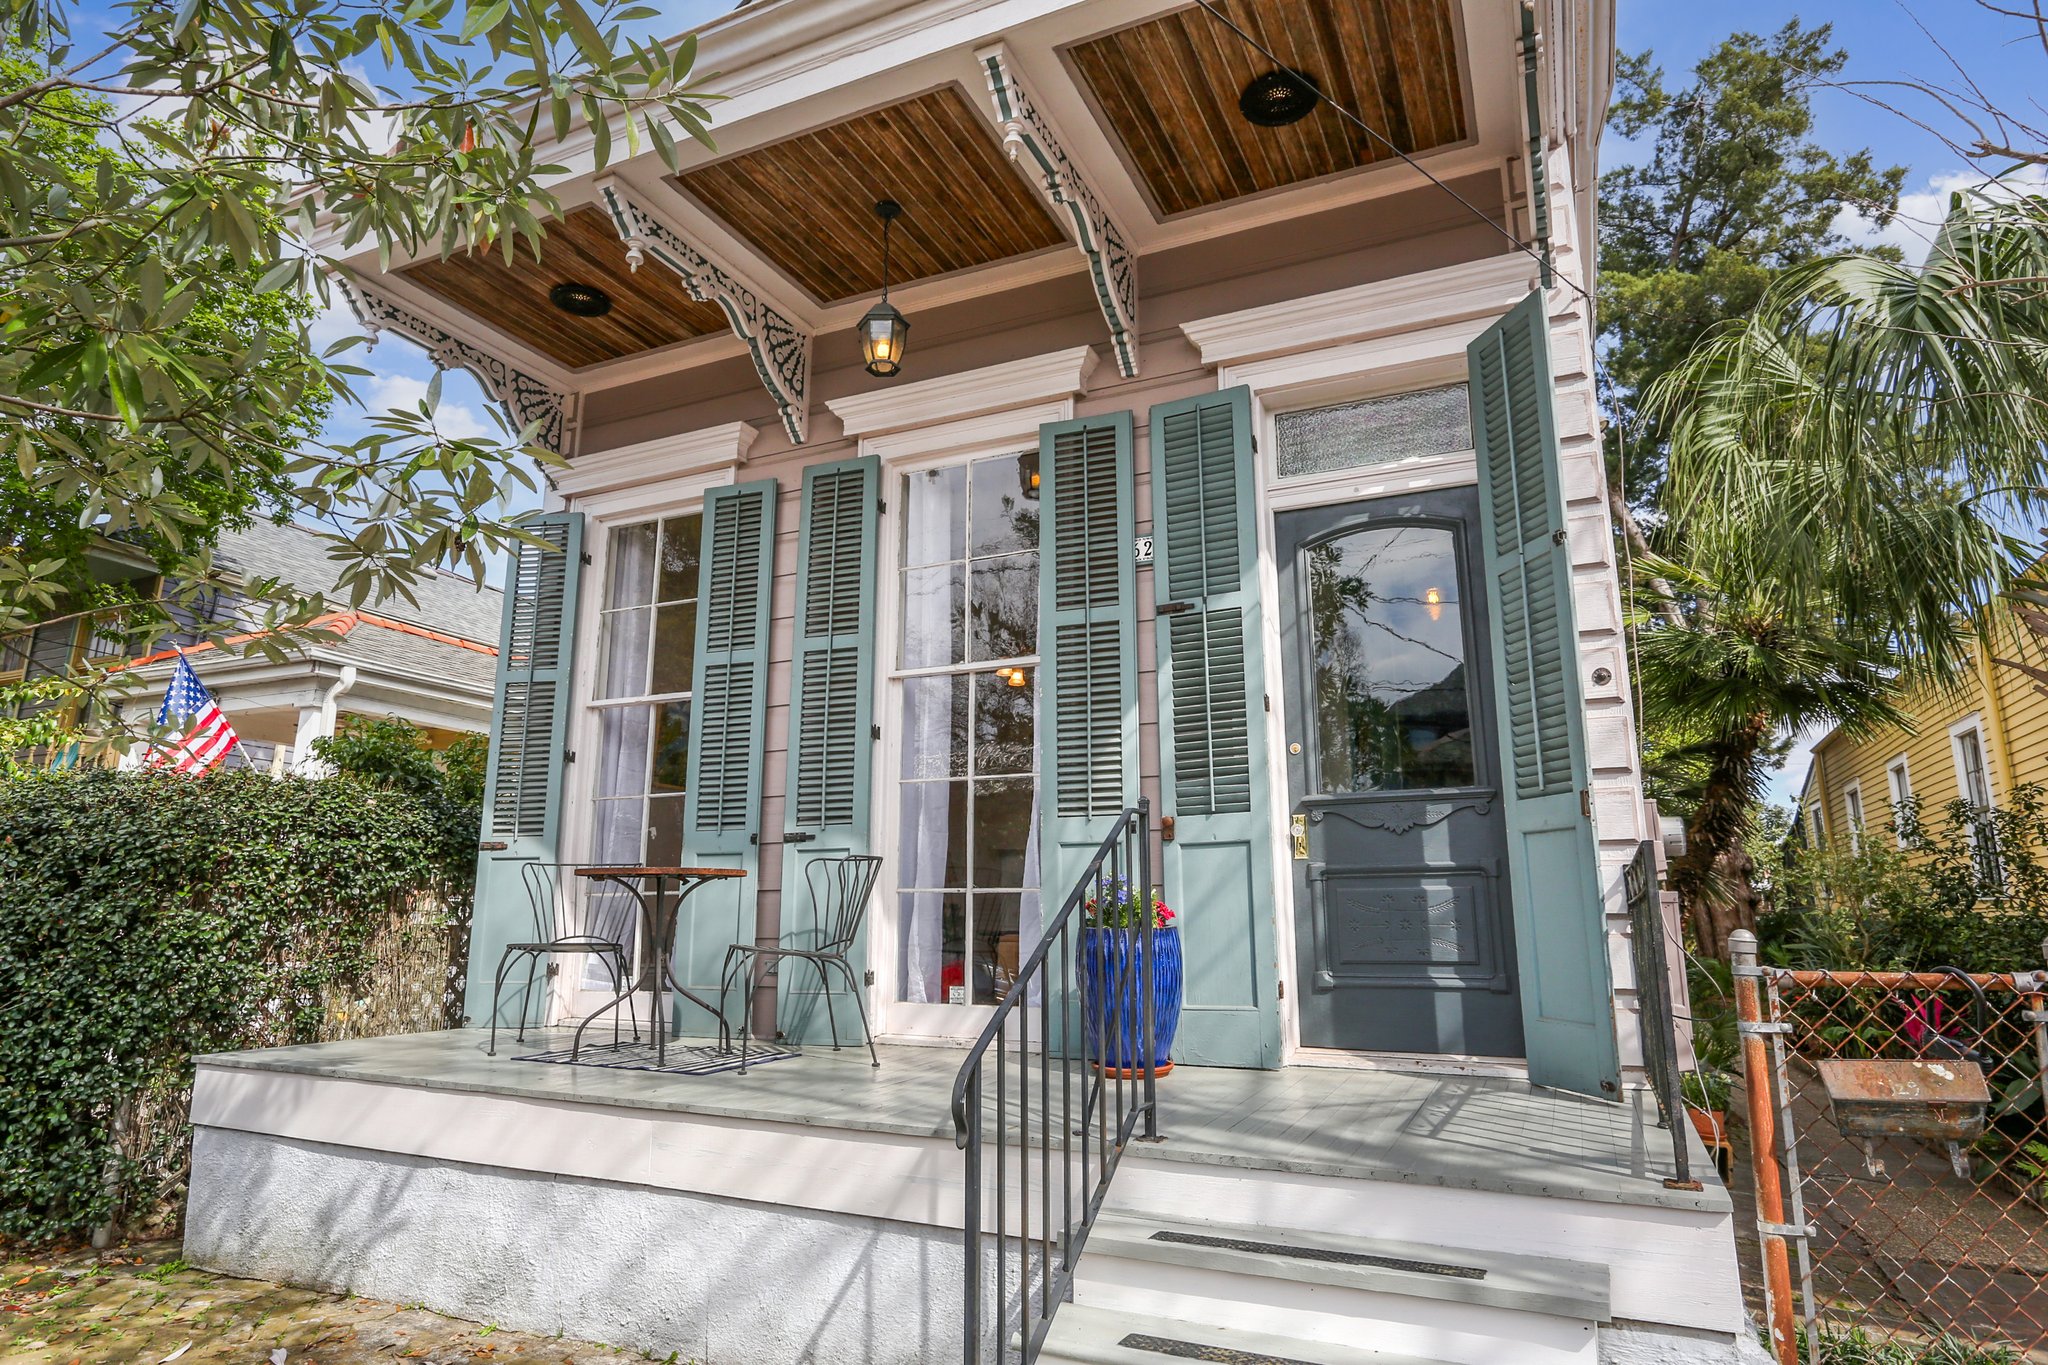 This pre-1883 three-bay shotgun home boasts Victorian embellishments and an inviting front porch